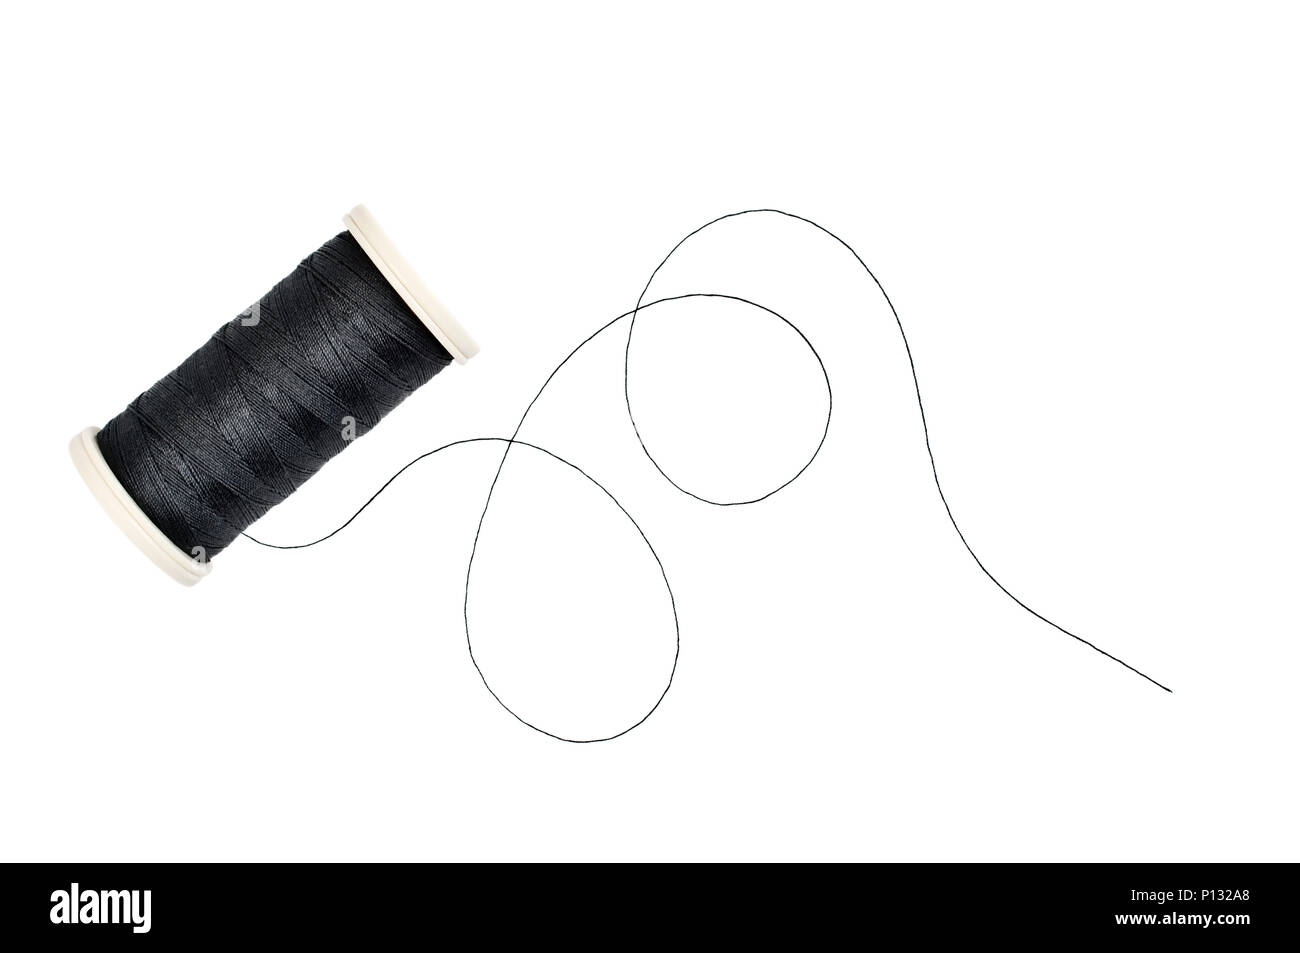 Spool of sewing thread on white background. Stock Photo